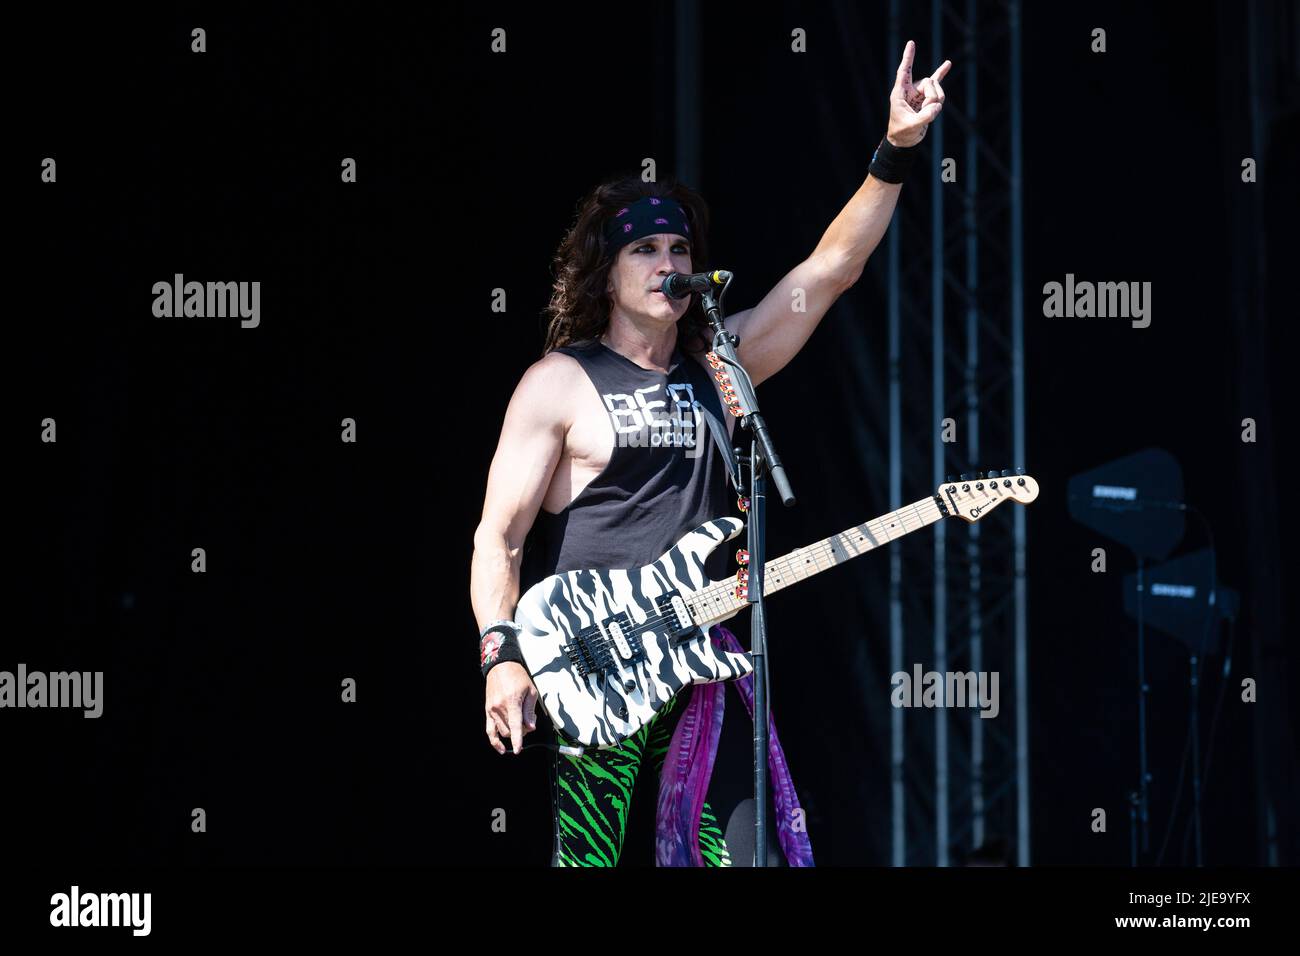 Oslo, Norway. 24th, June 2022. The American glam metal band Steel Panther performs a live concert during the Norwegian music festival Tons of Rock 2022 in Oslo. Here guitarist Satchel is seen live on stage. (Photo credit: Gonzales Photo - Per-Otto Oppi). Stock Photo